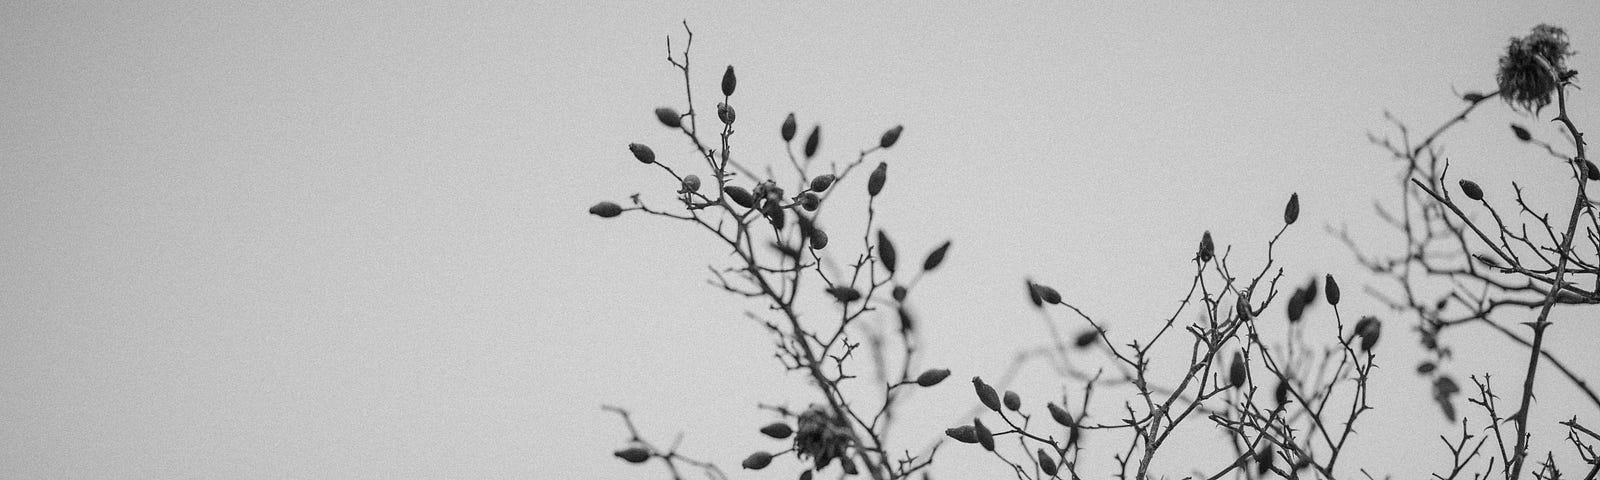 A black and white image of wild rosehips against a grey sky.